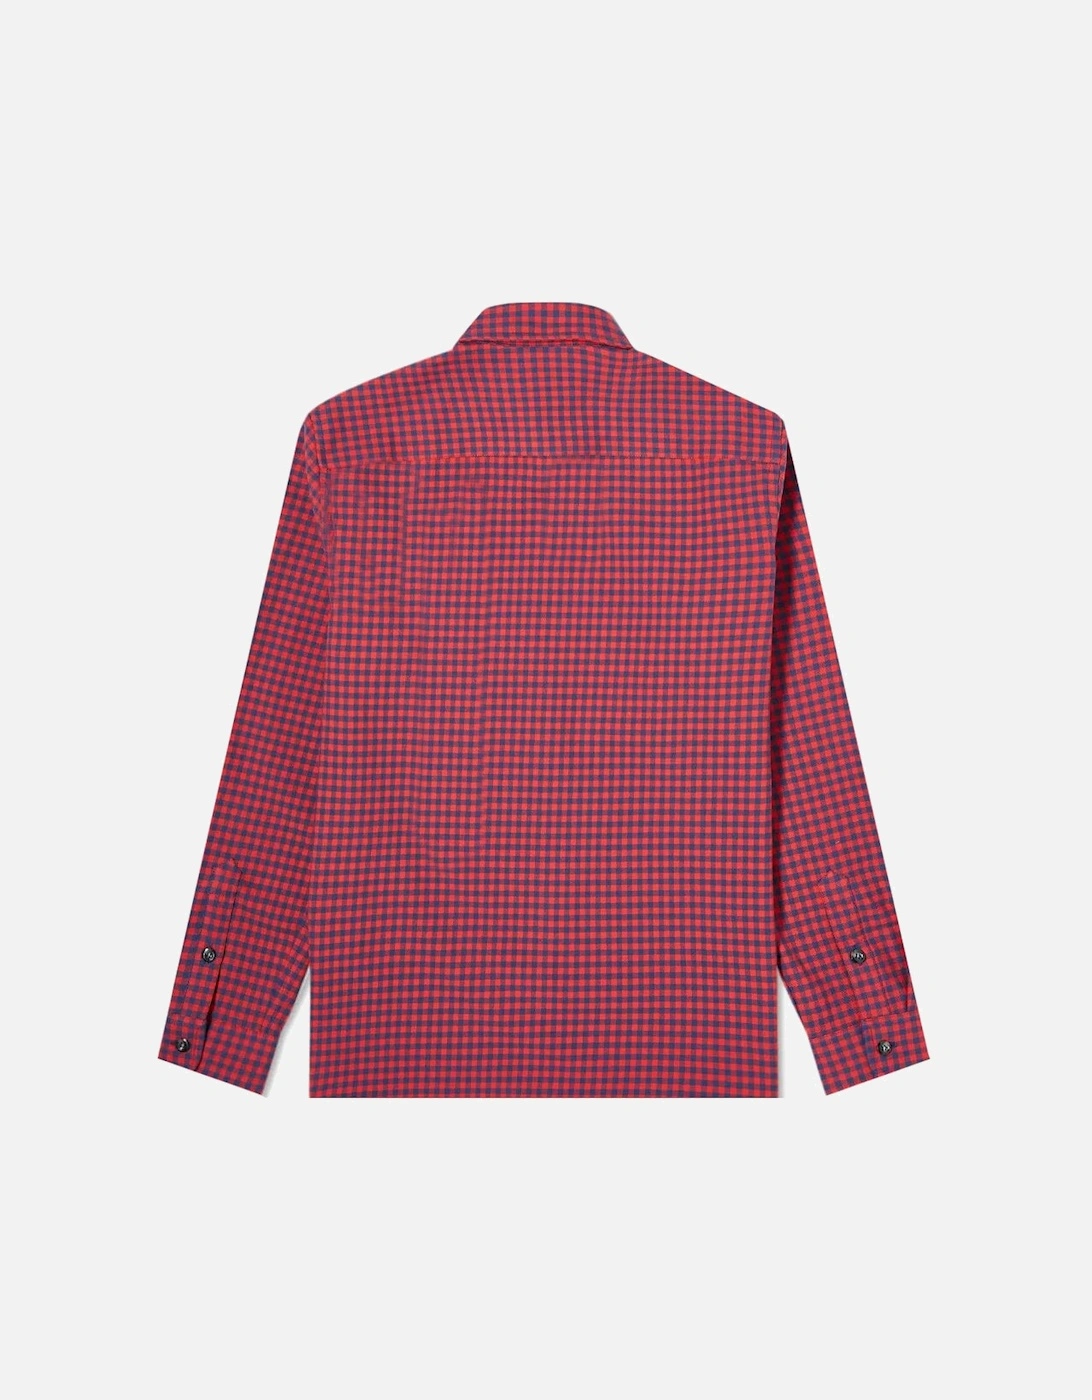 A.P.C. Men's Red Check Jules Shirt Red